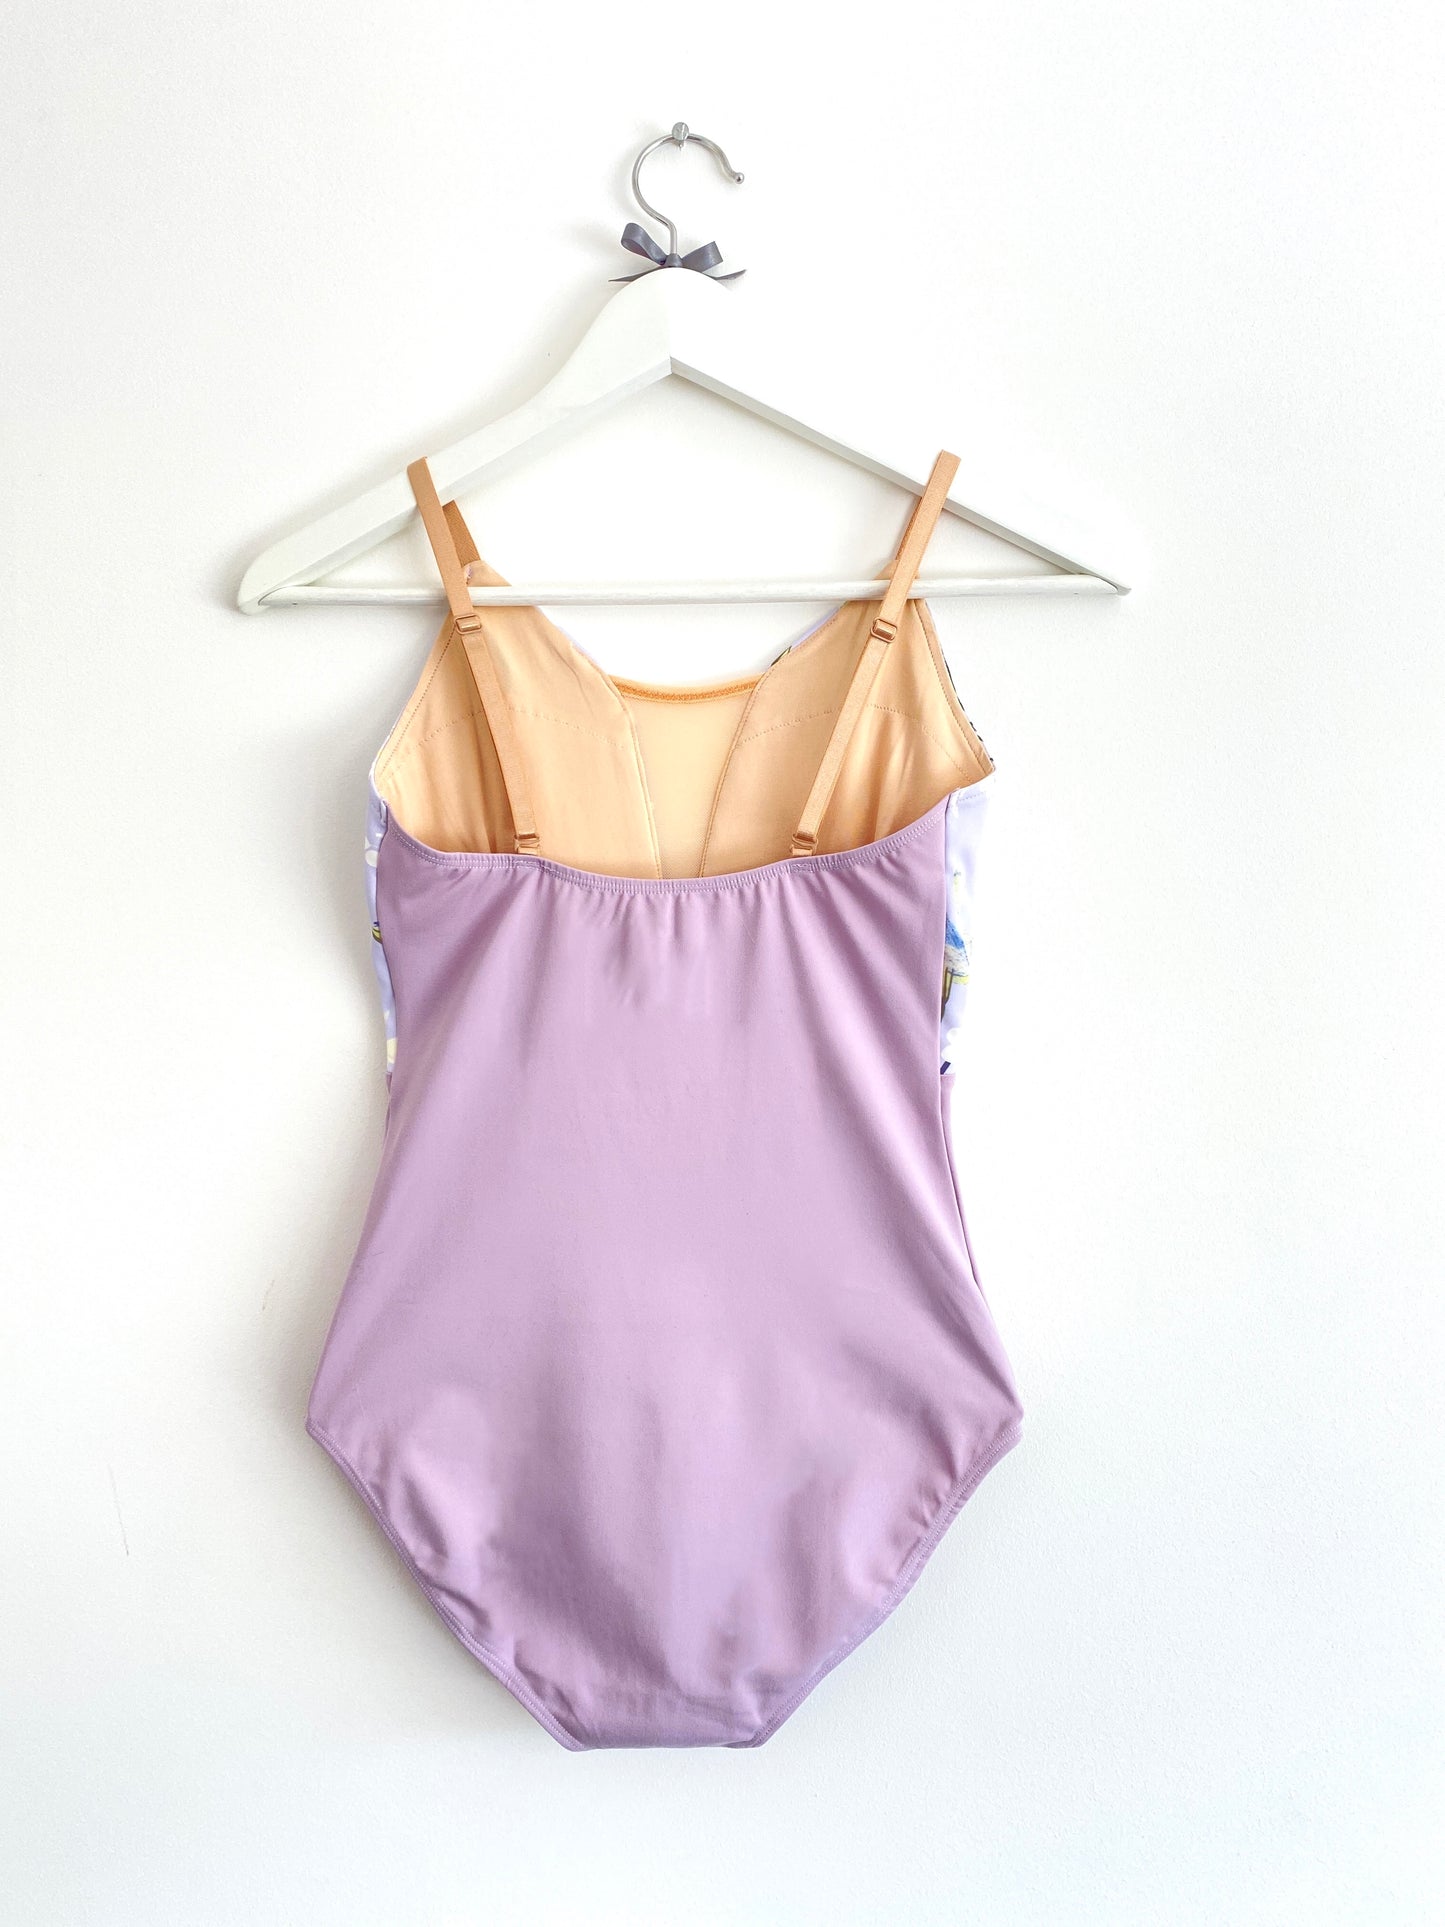 Lilac Meadow camisole ballet leotard from The Collective Dancewear